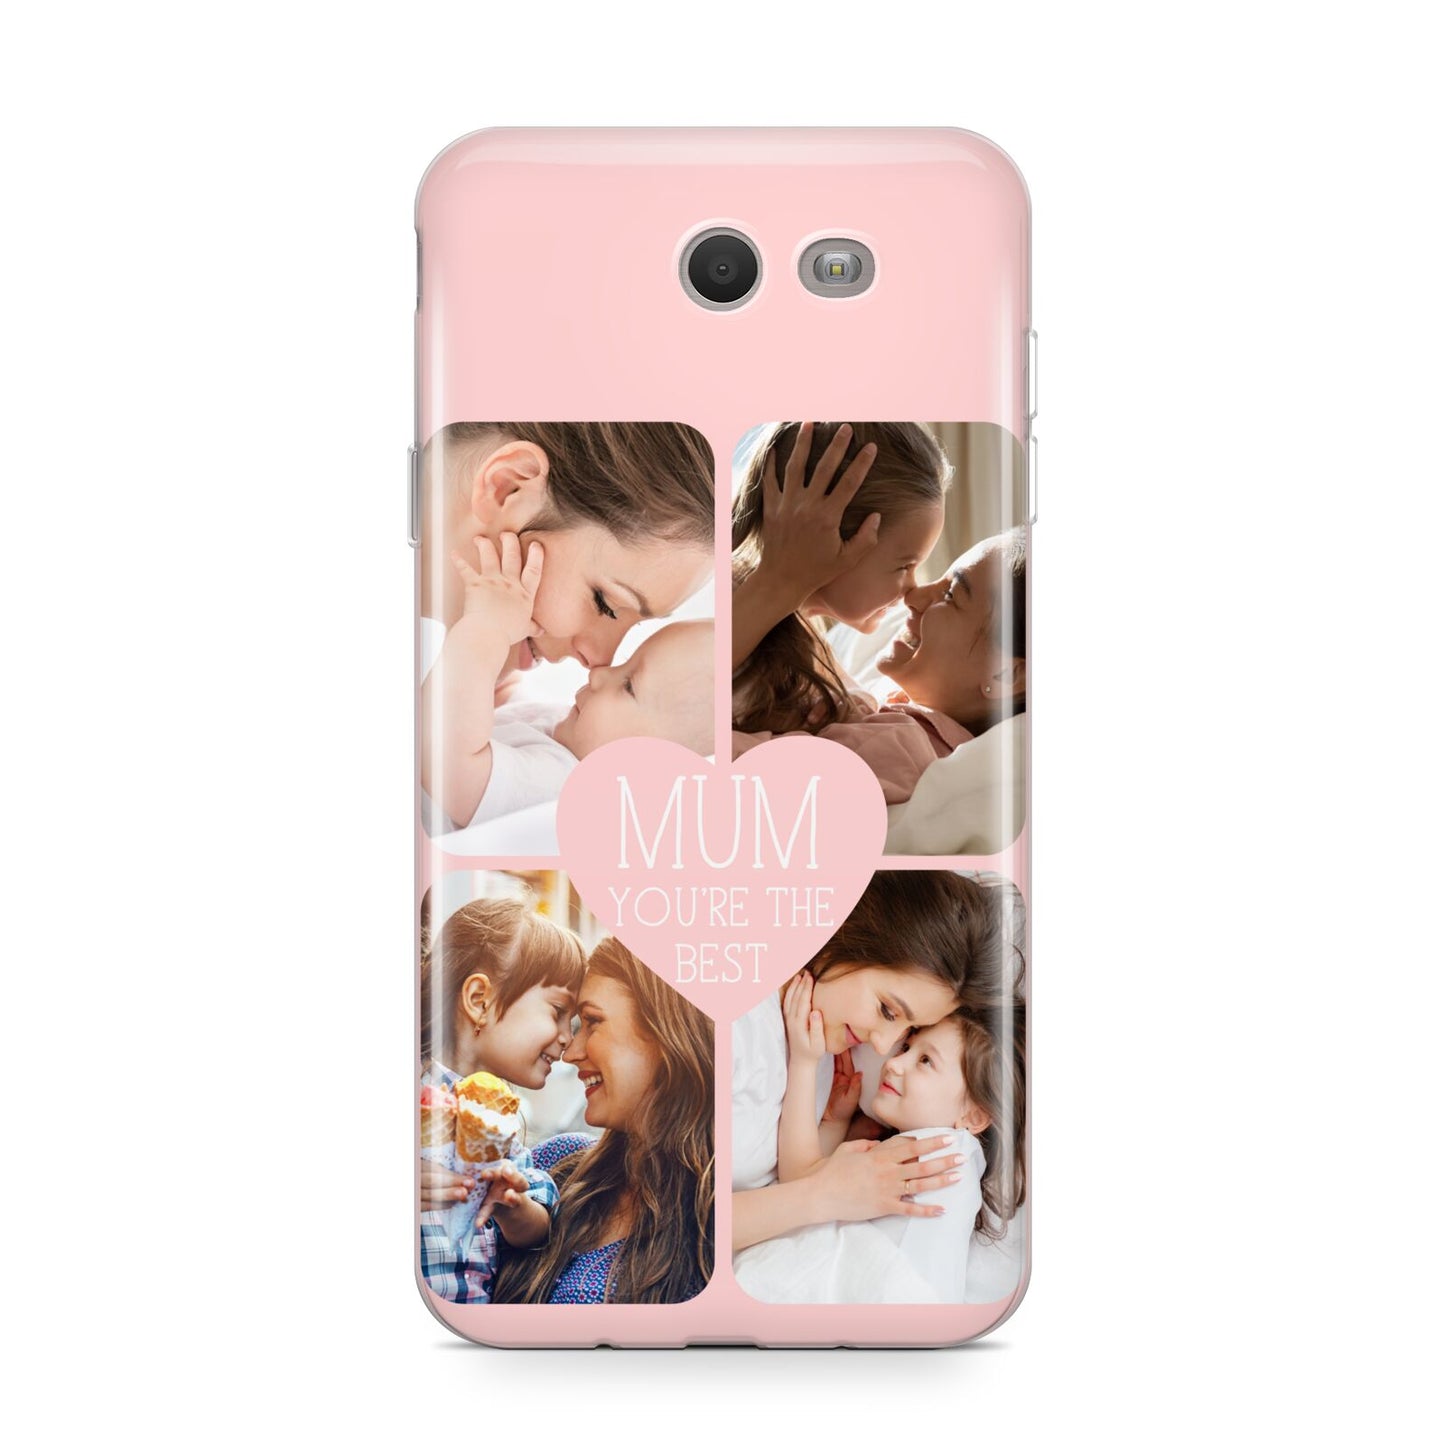 Mothers Day Four Photo Upload Samsung Galaxy J7 2017 Case